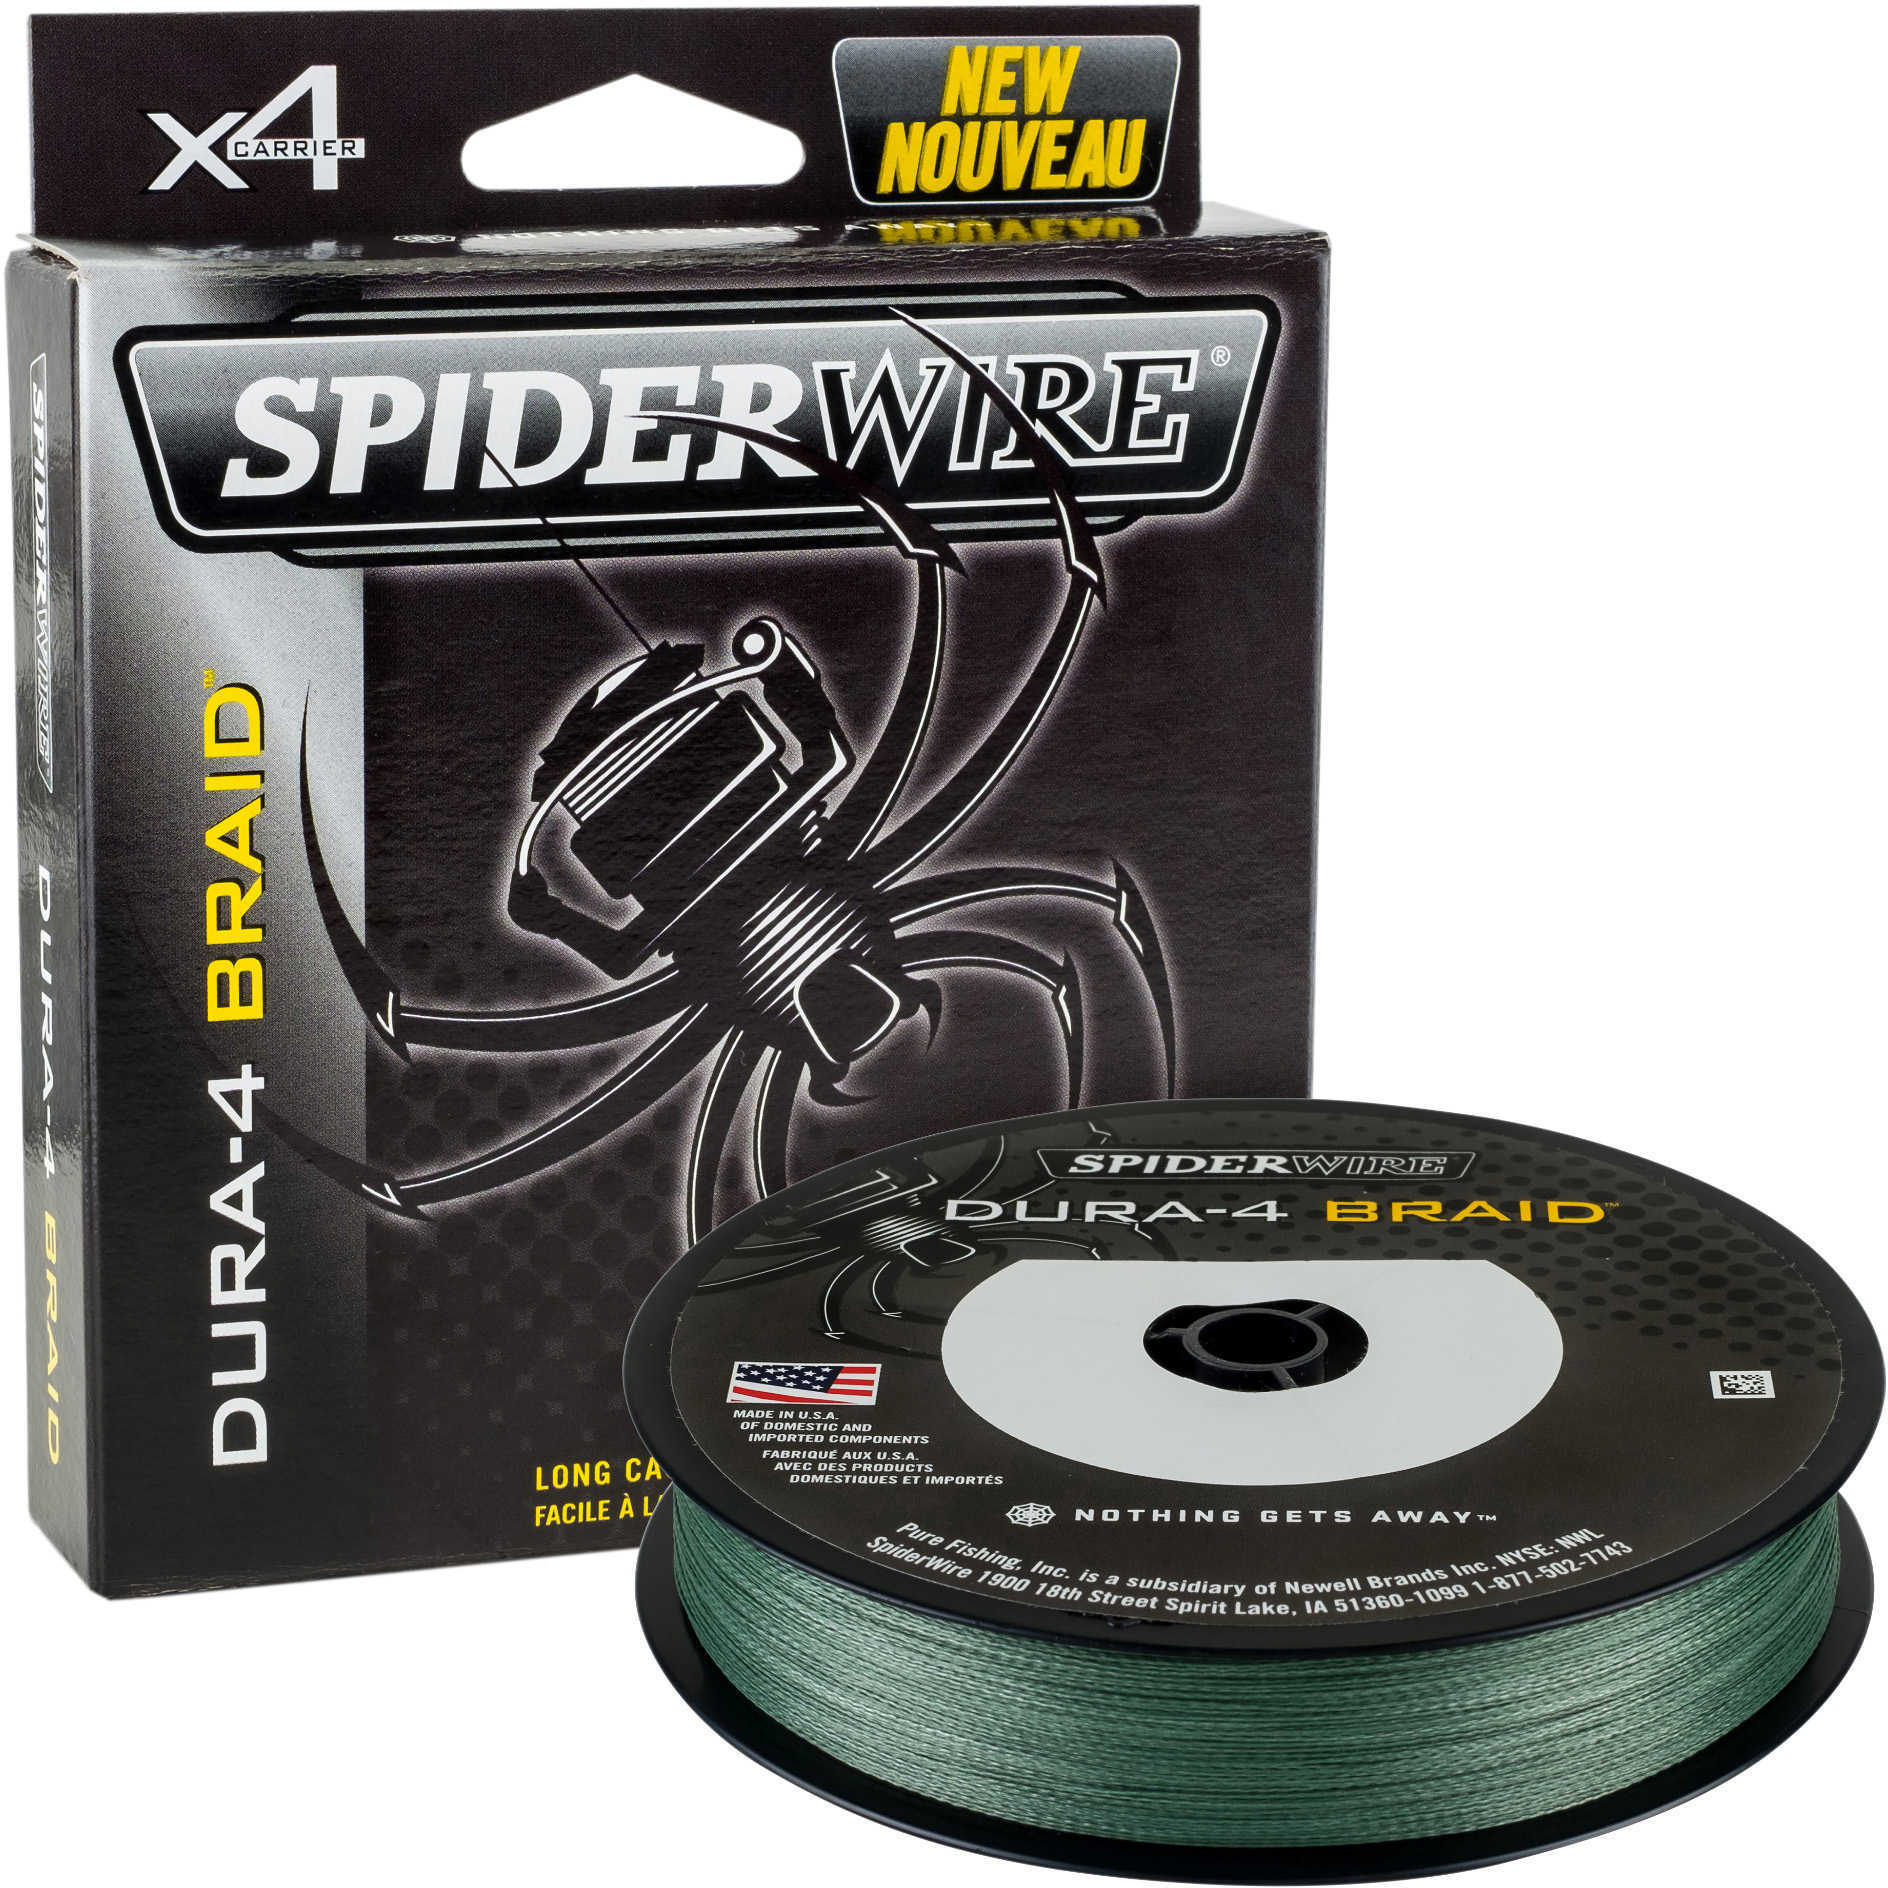 Spiderwire Dura-4 Braided Line 125 Yards , 20 lbs Tested, 0.010" Diameter, Moss Green